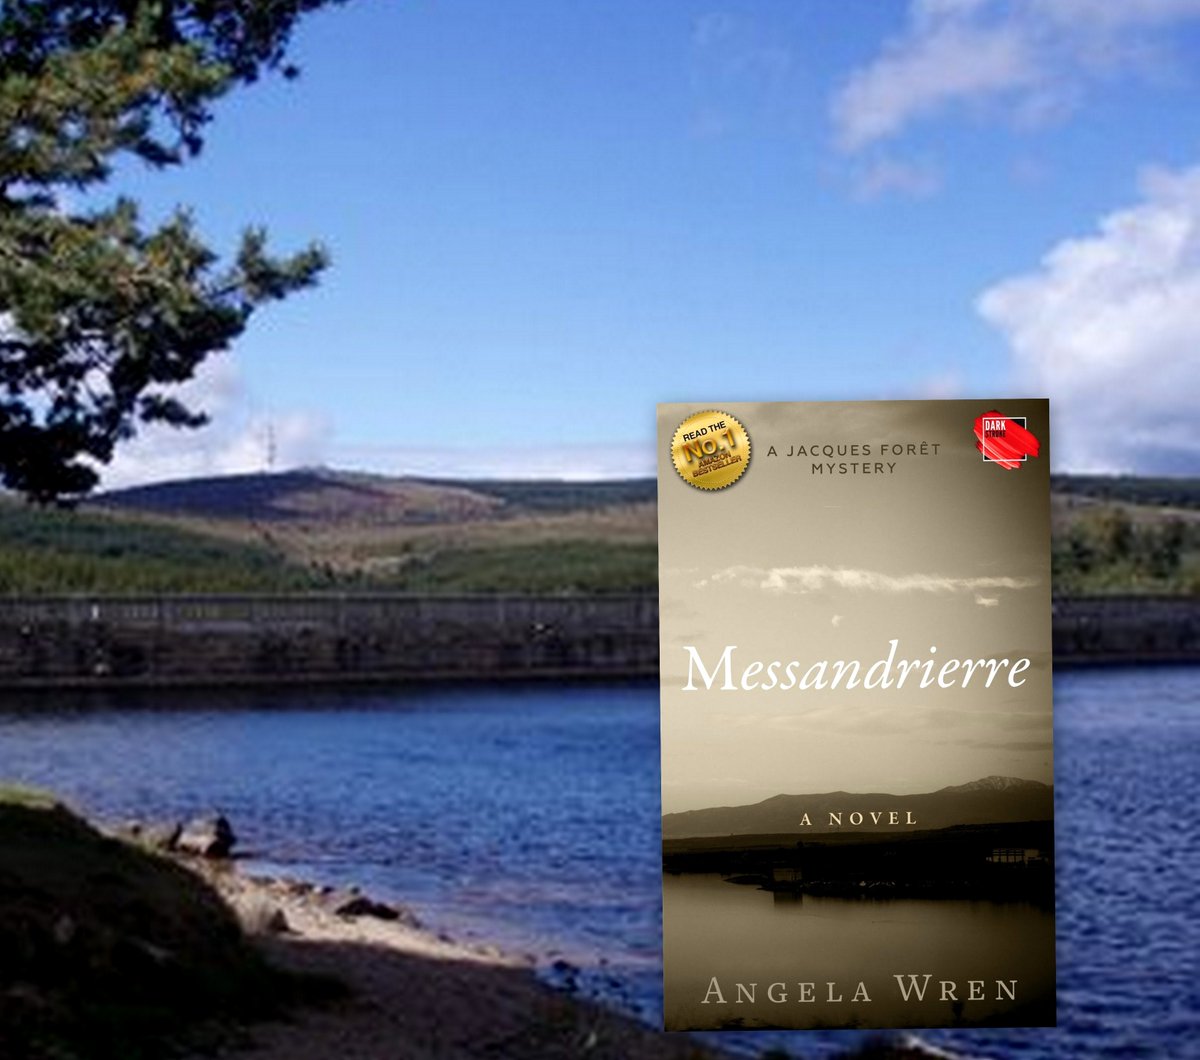 ⭐⭐⭐⭐⭐ #Messandrierre 
A murder mystery with dark twists. The first of the #JacquesForêtMysteries set in the #Cévennes in south-central France. Check it out... author.to/JacquesForet

📚📔#CosyCrime #KU #Kindle #JamesetMoi